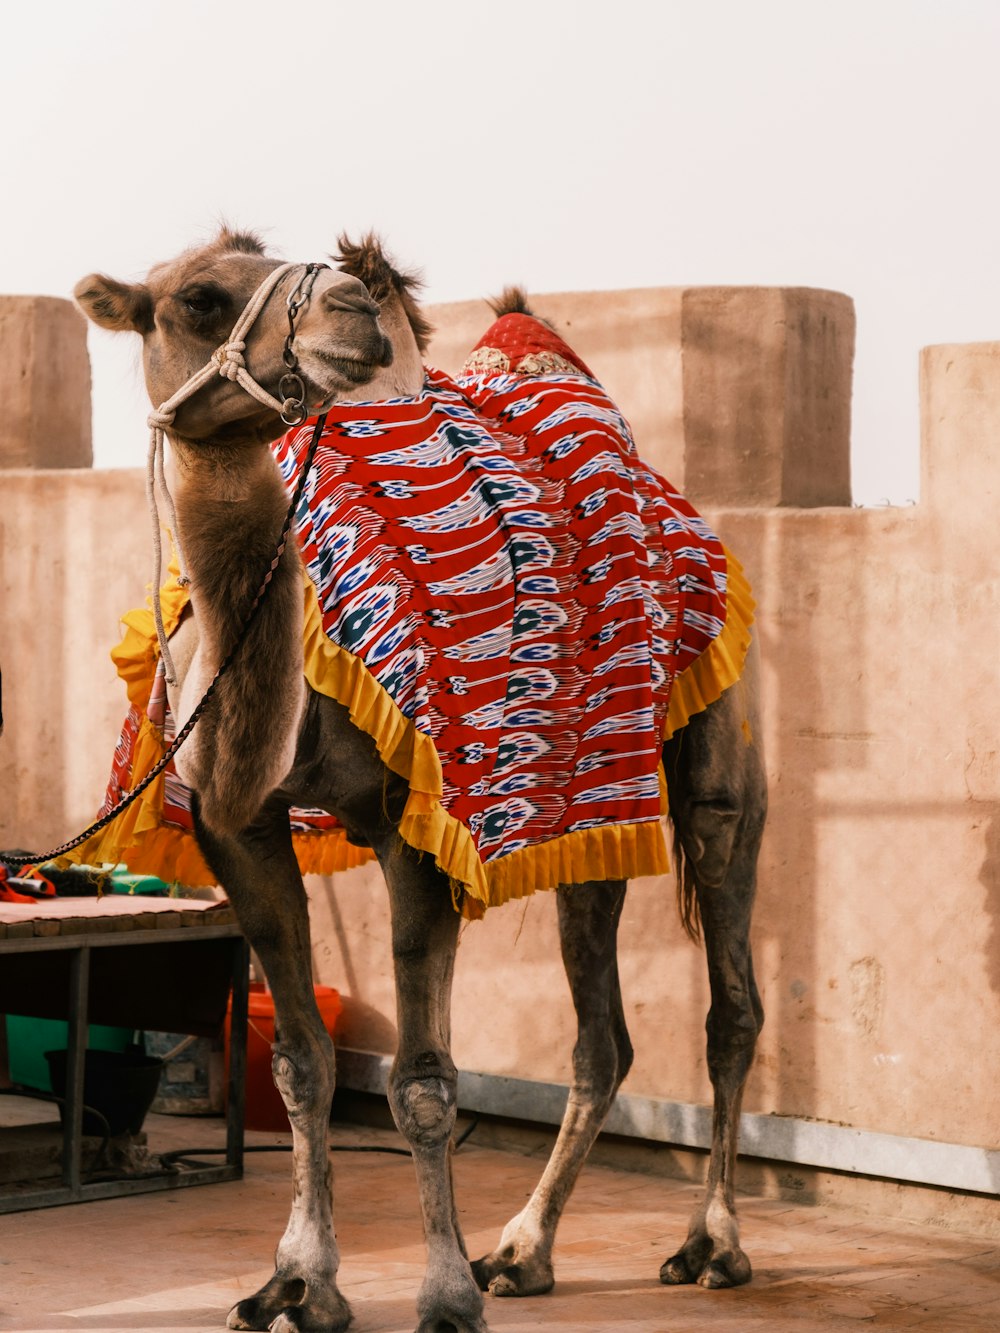 a camel wearing a red and blue blanket